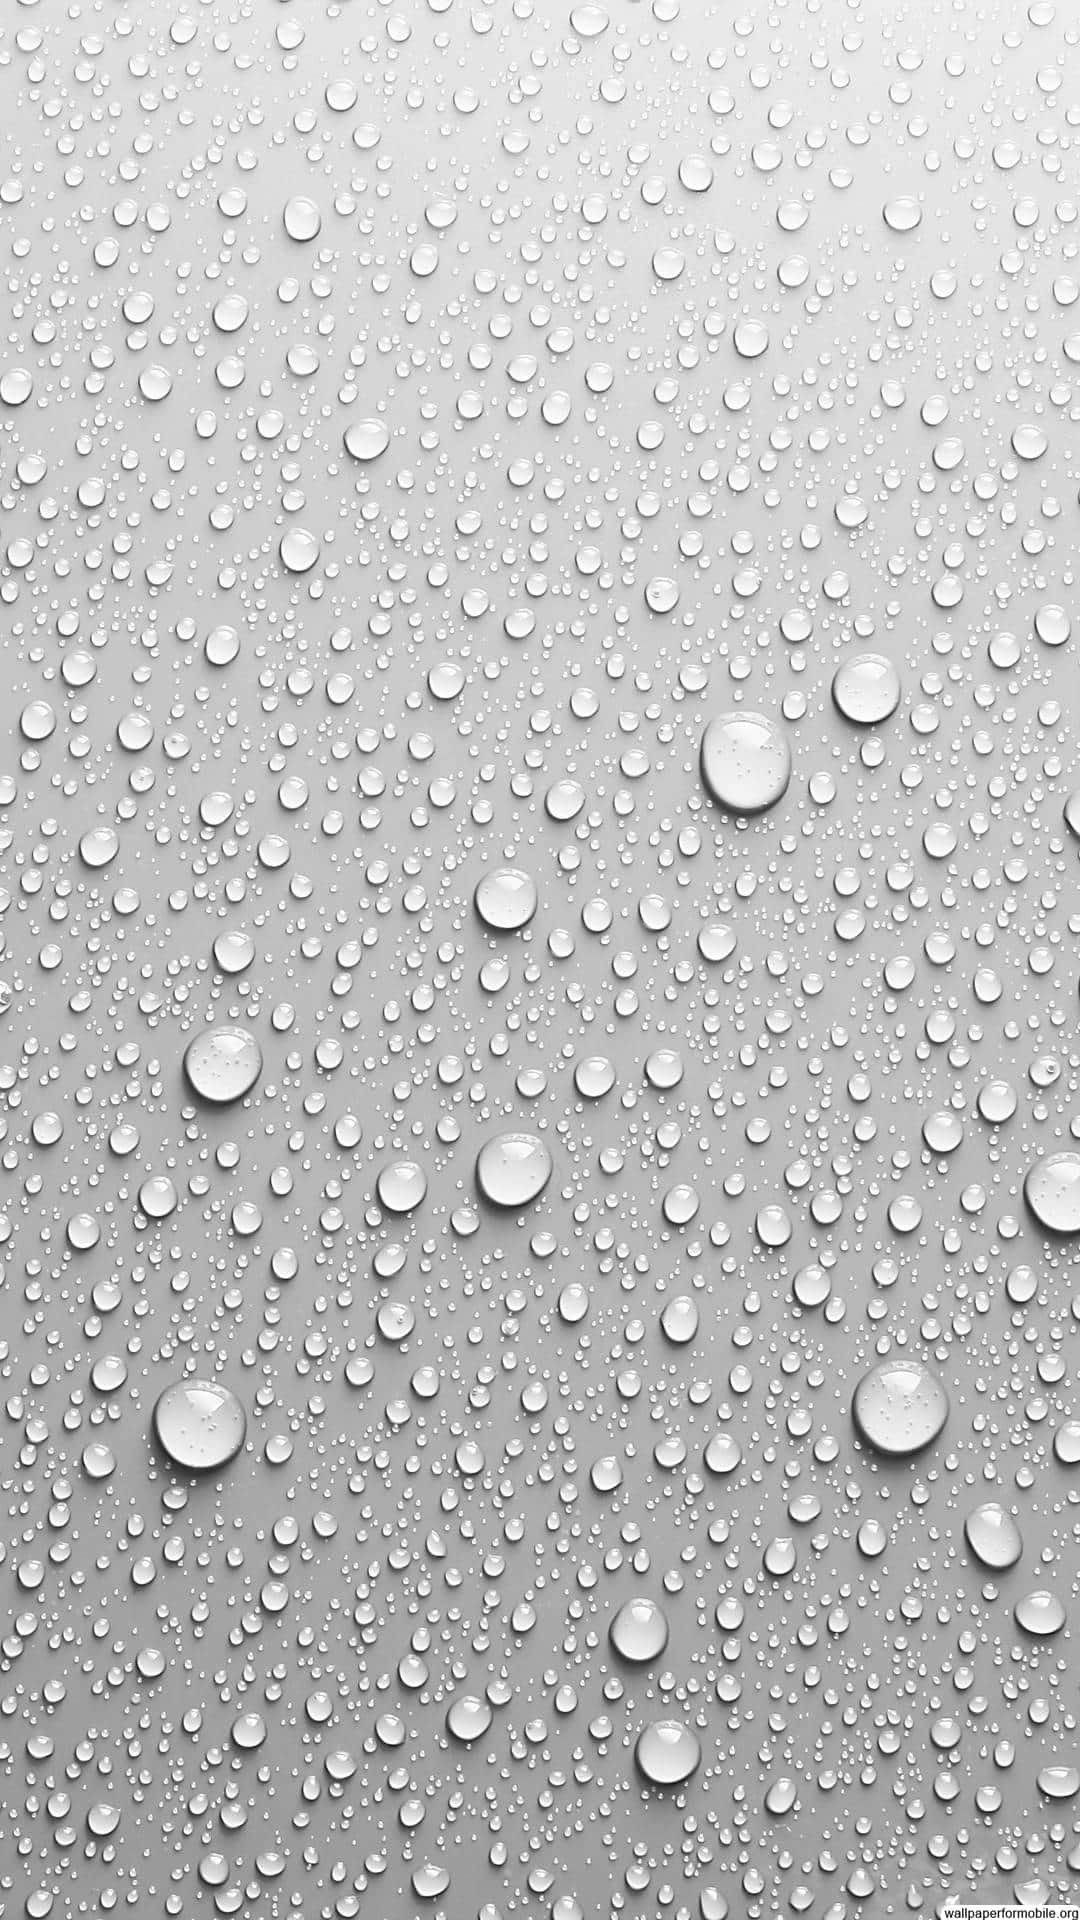 Gray And White HD Wallpaper Android. iPad mini wallpaper, iPhone wallpaper water, Android wallpaper